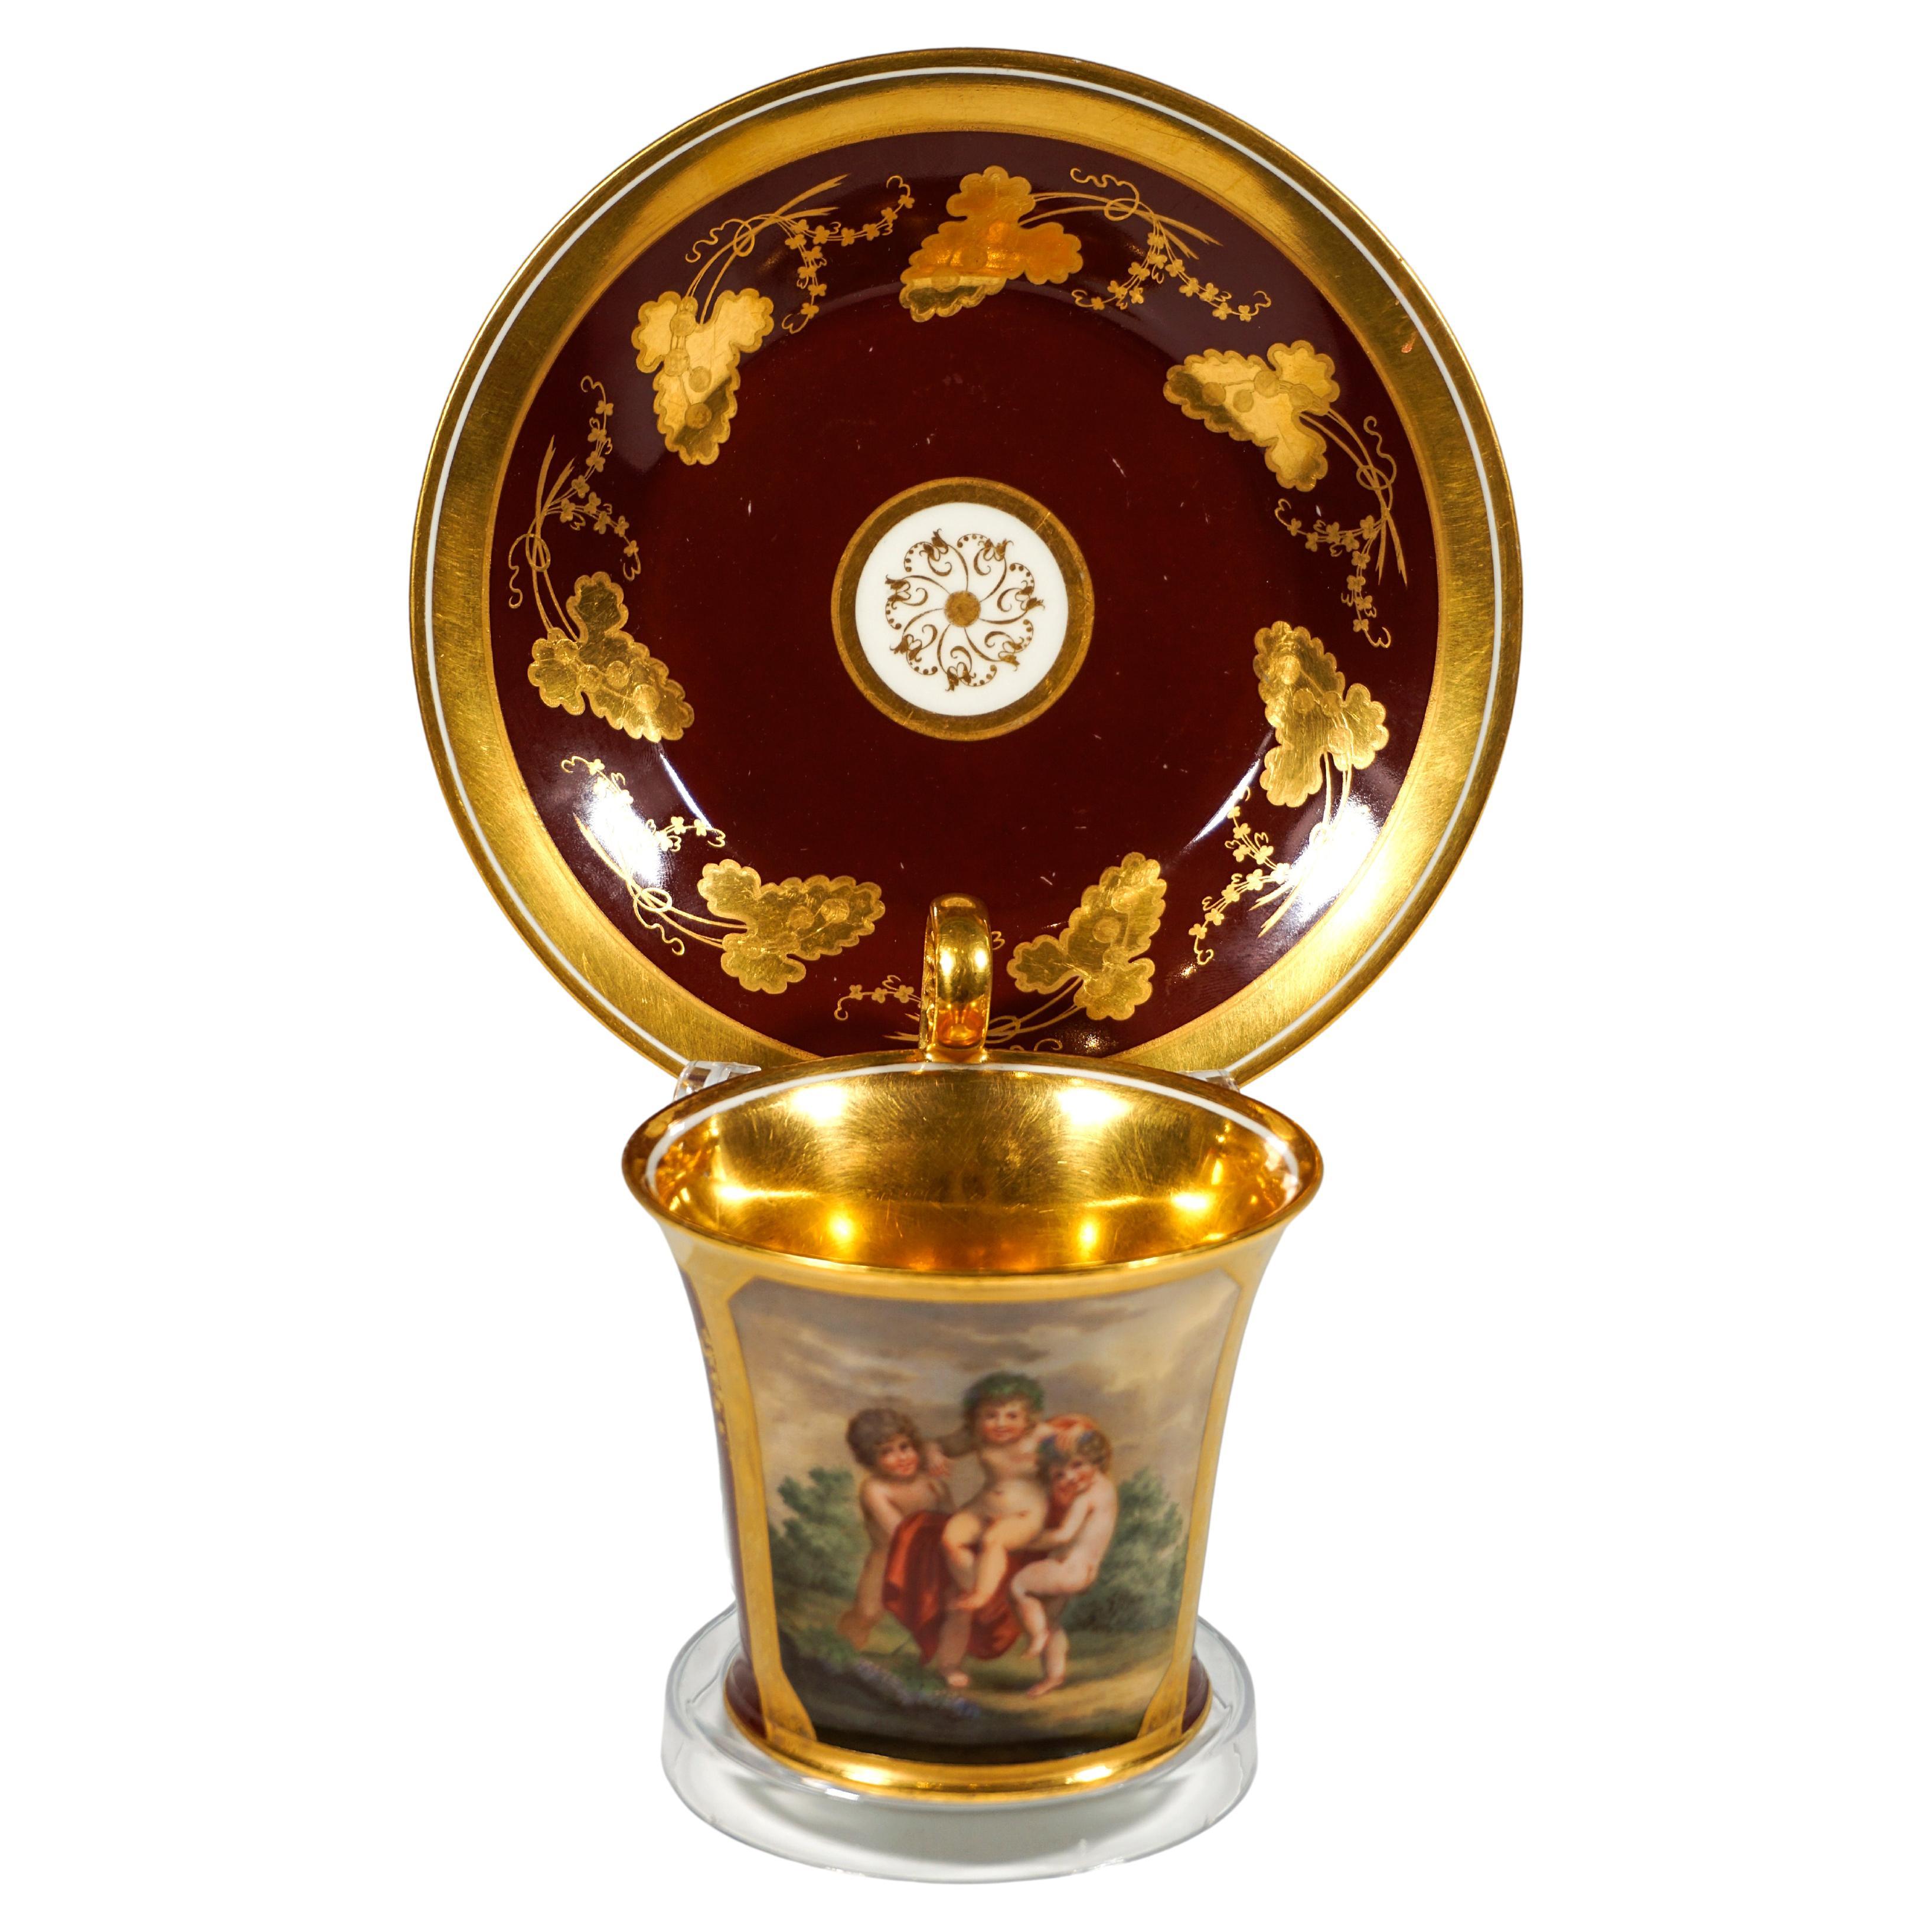 Viennese Imperial Porcelain Collecting Cup 'Three Cupids As Bacchants', 1816